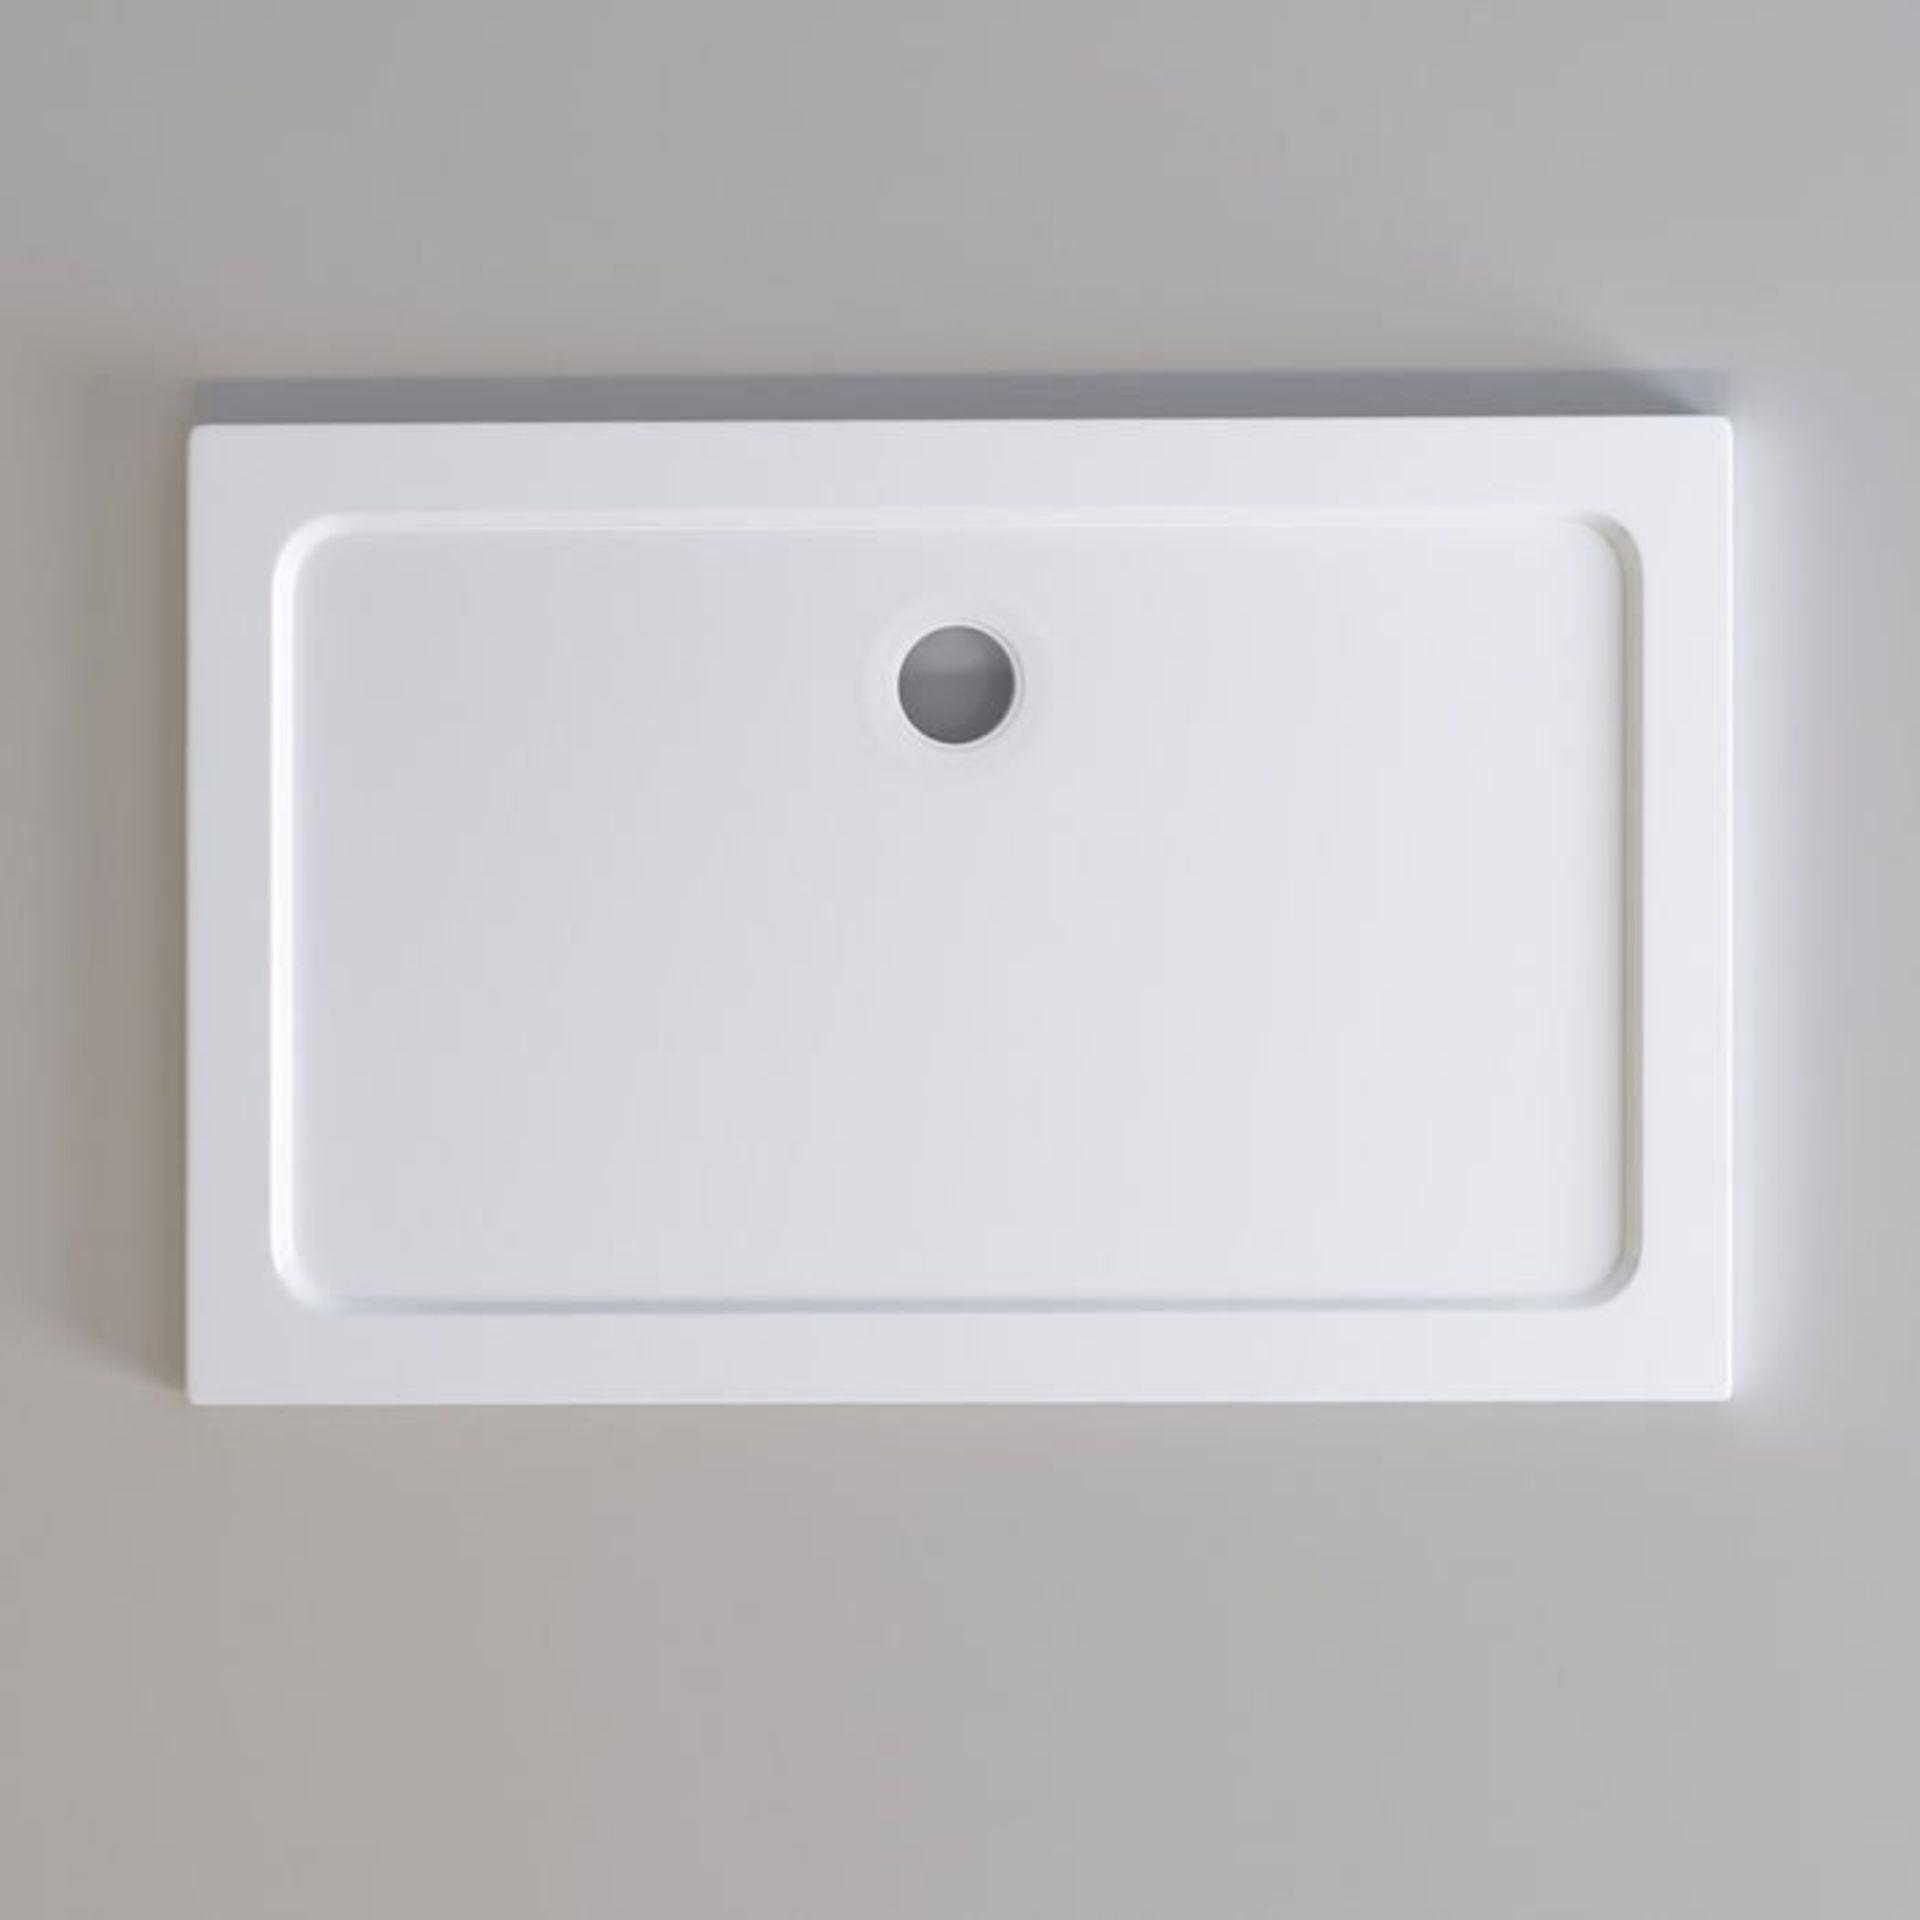 (S130) 1200x760mm Rectangular Stone Shower Tray RRP £349.99 Low profile easy plumb design Gel coated